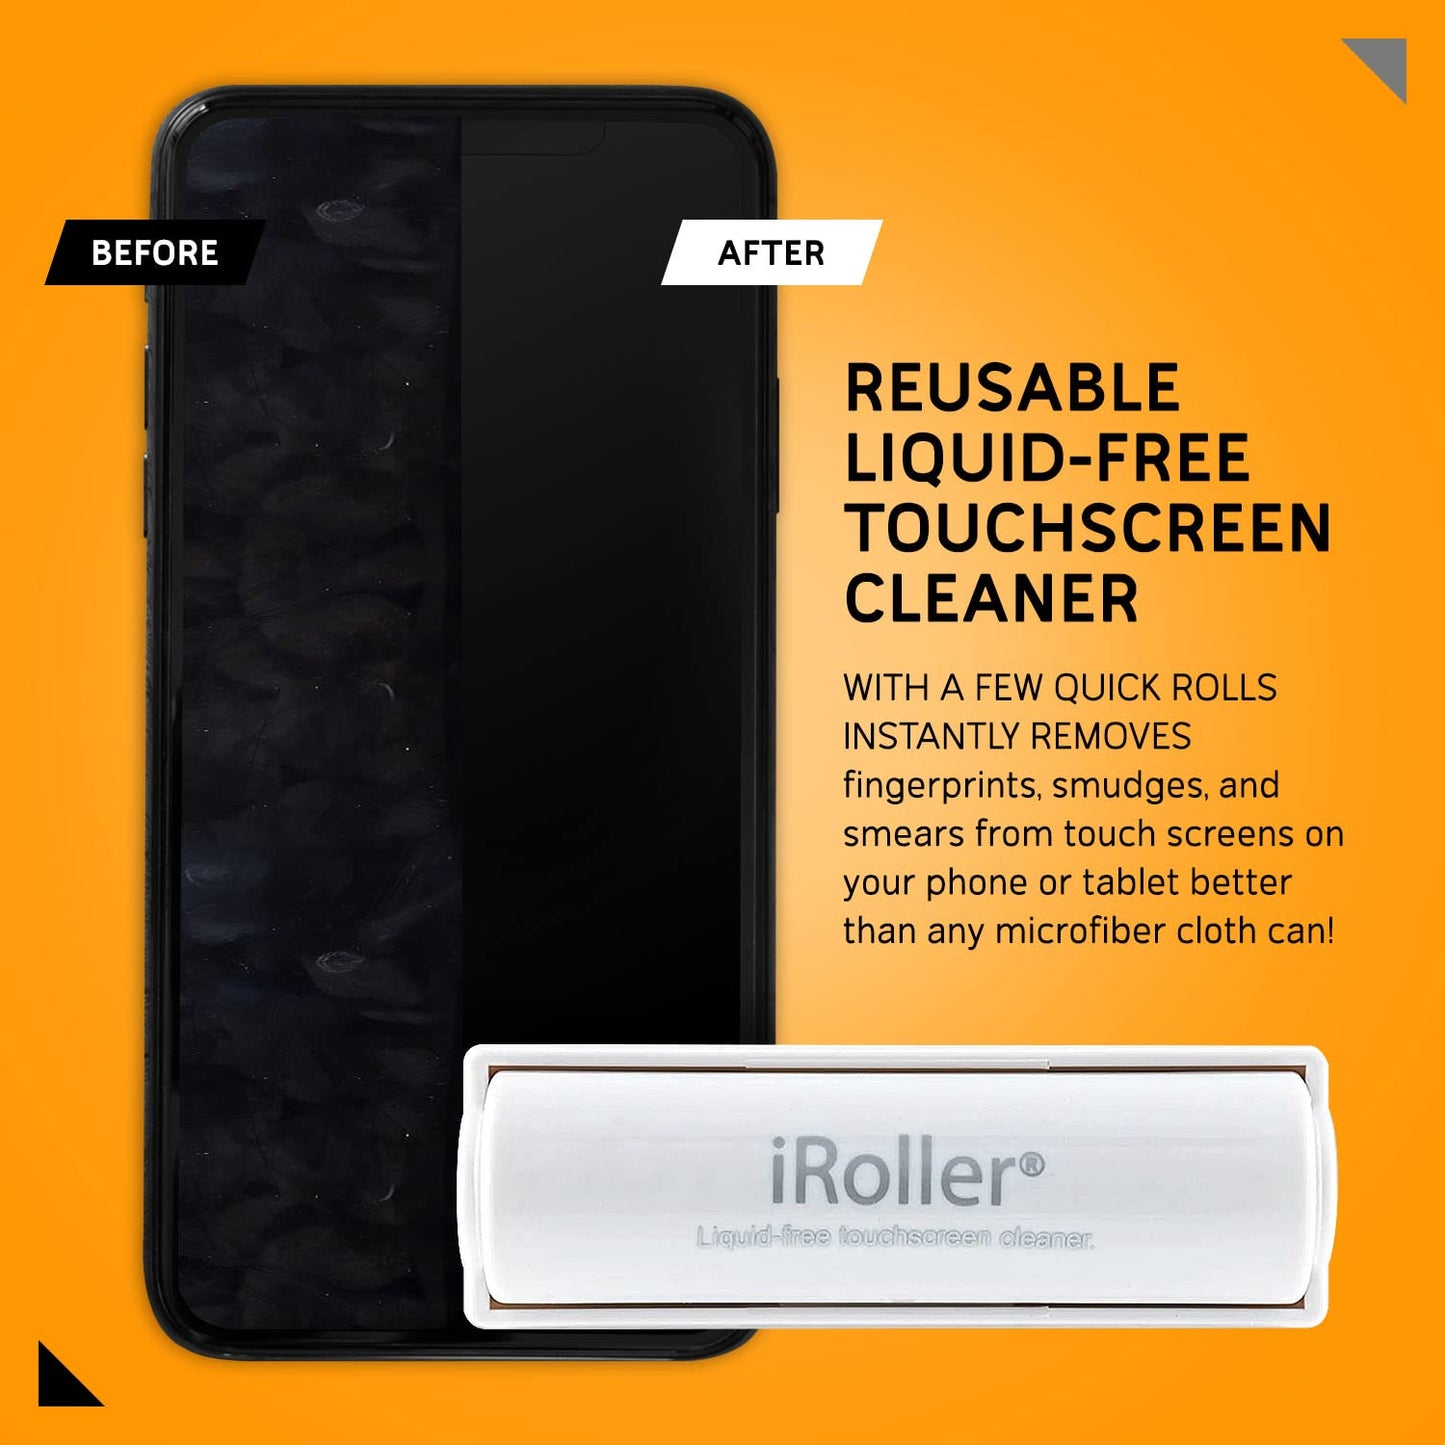 iRoller Premium Screen Cleaner, Reusable Non-Liquid, Non-Chemical Phone Cleaning Roller for iPhone, iPad, Laptop, MacBook, Computer Monitors, TV & Smartphones - No Wipes, Cloth or Spray Required